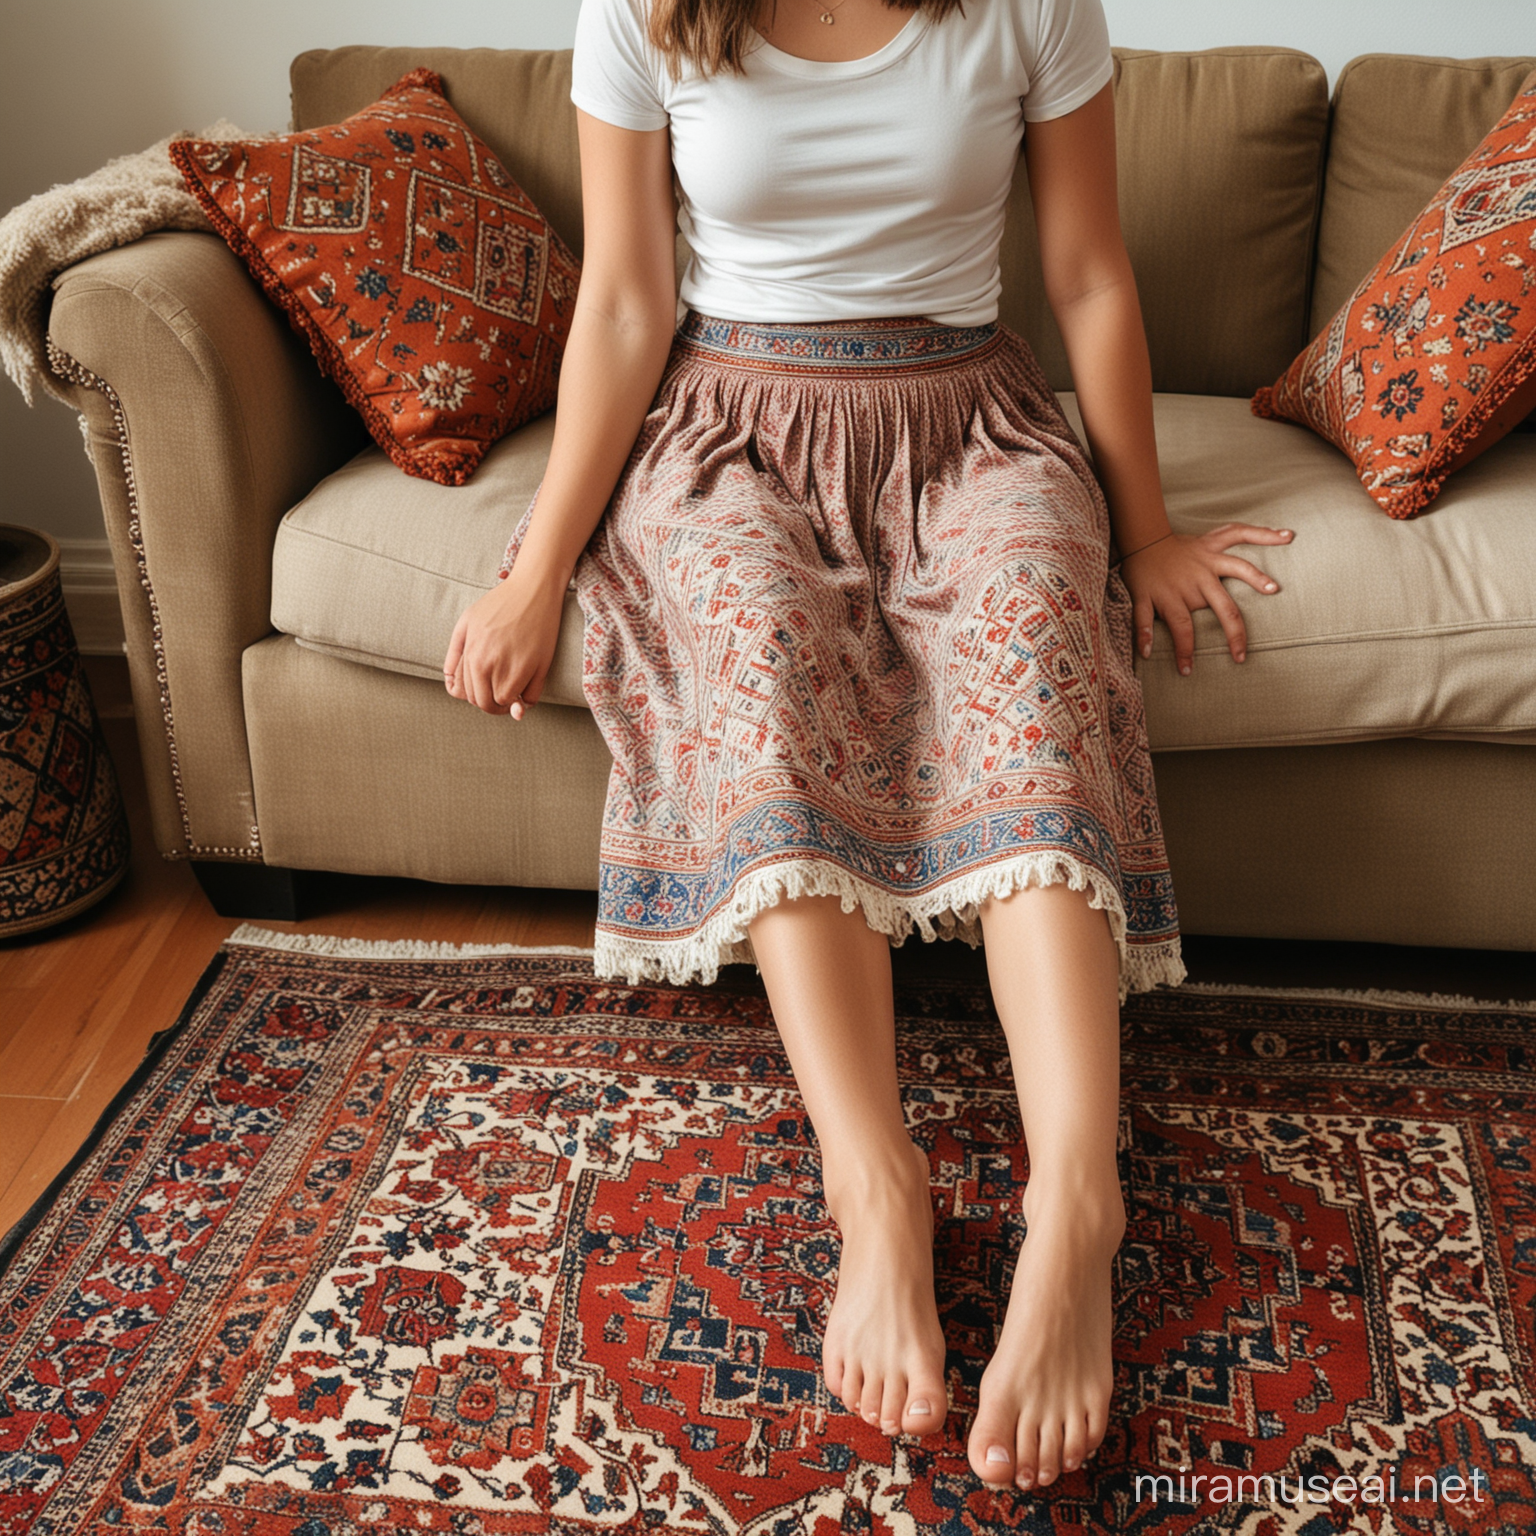 A girl wearing a skirt and sitting on a sofa with a Persian rug under her feet